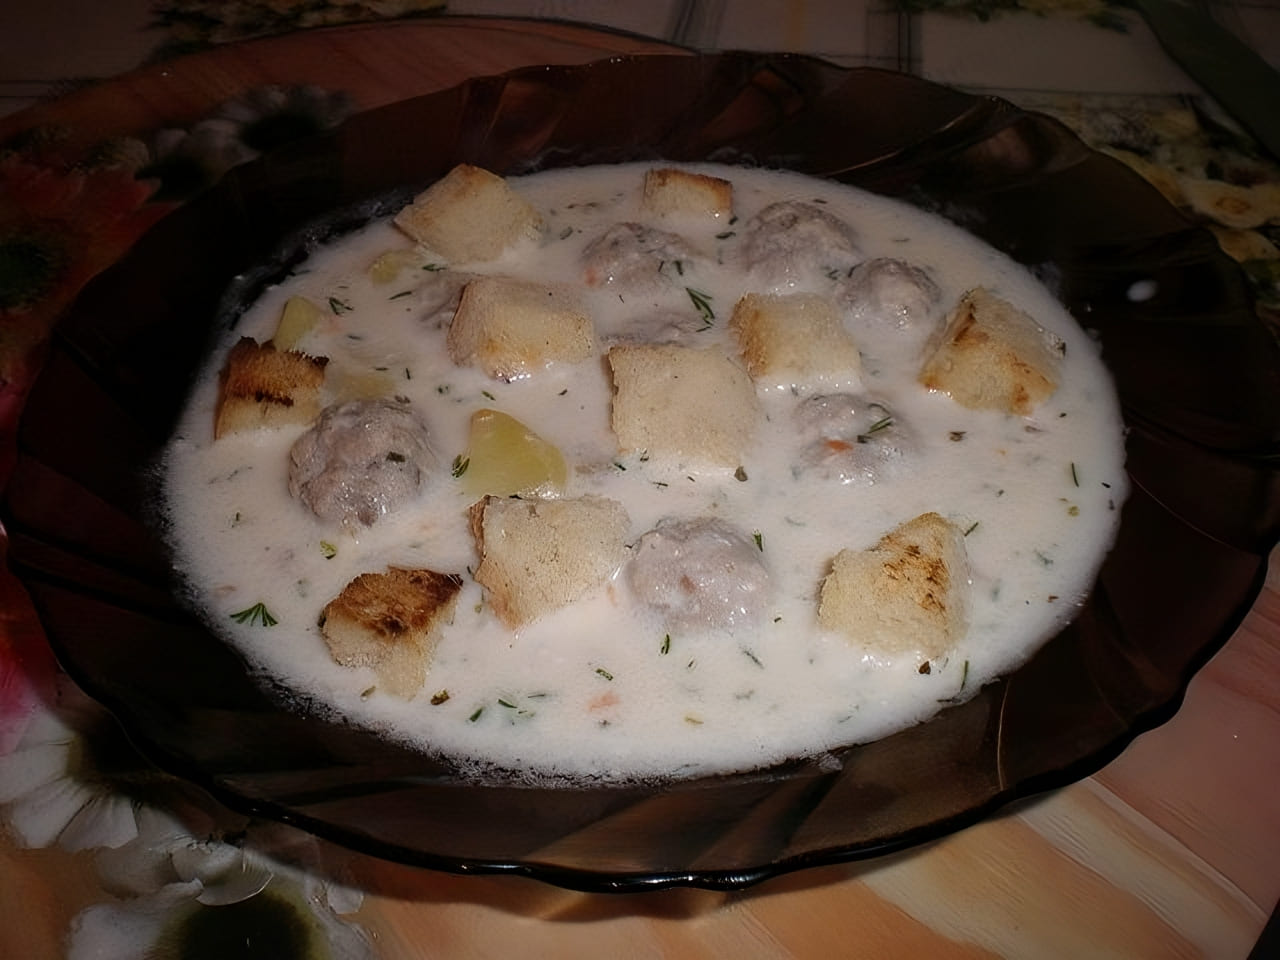 Creamy Meatball Soup with Croutons - A Hearty Delight!